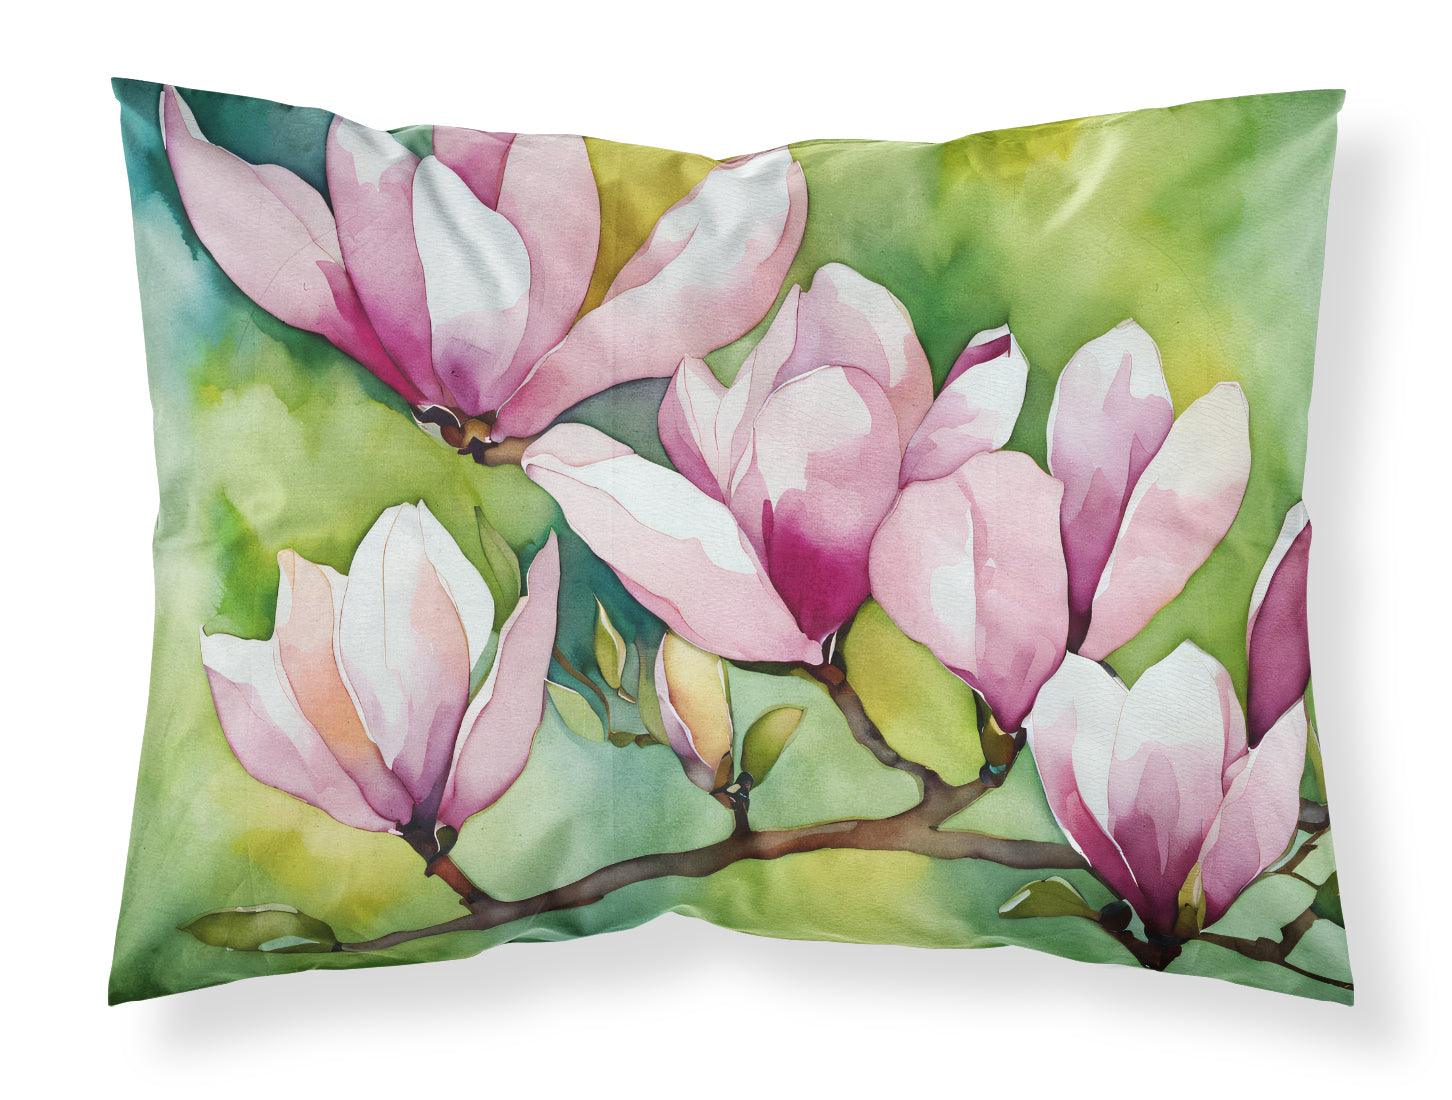 Buy this Mississippi Magnolia in Watercolor Fabric Standard Pillowcase